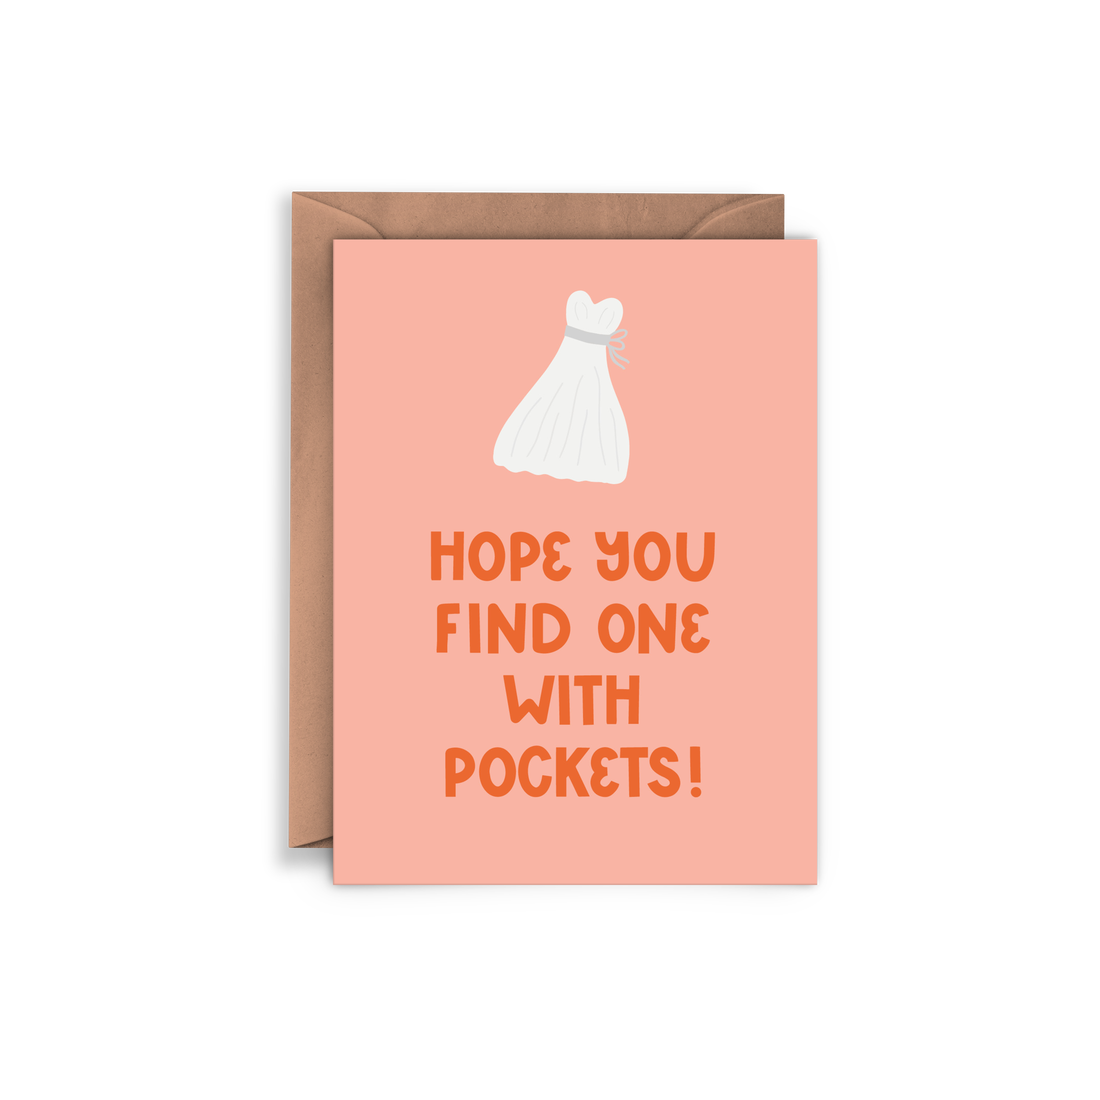 Hope you find one with pockets greeting card with pink background, red lettering and an illustrated wedding dress